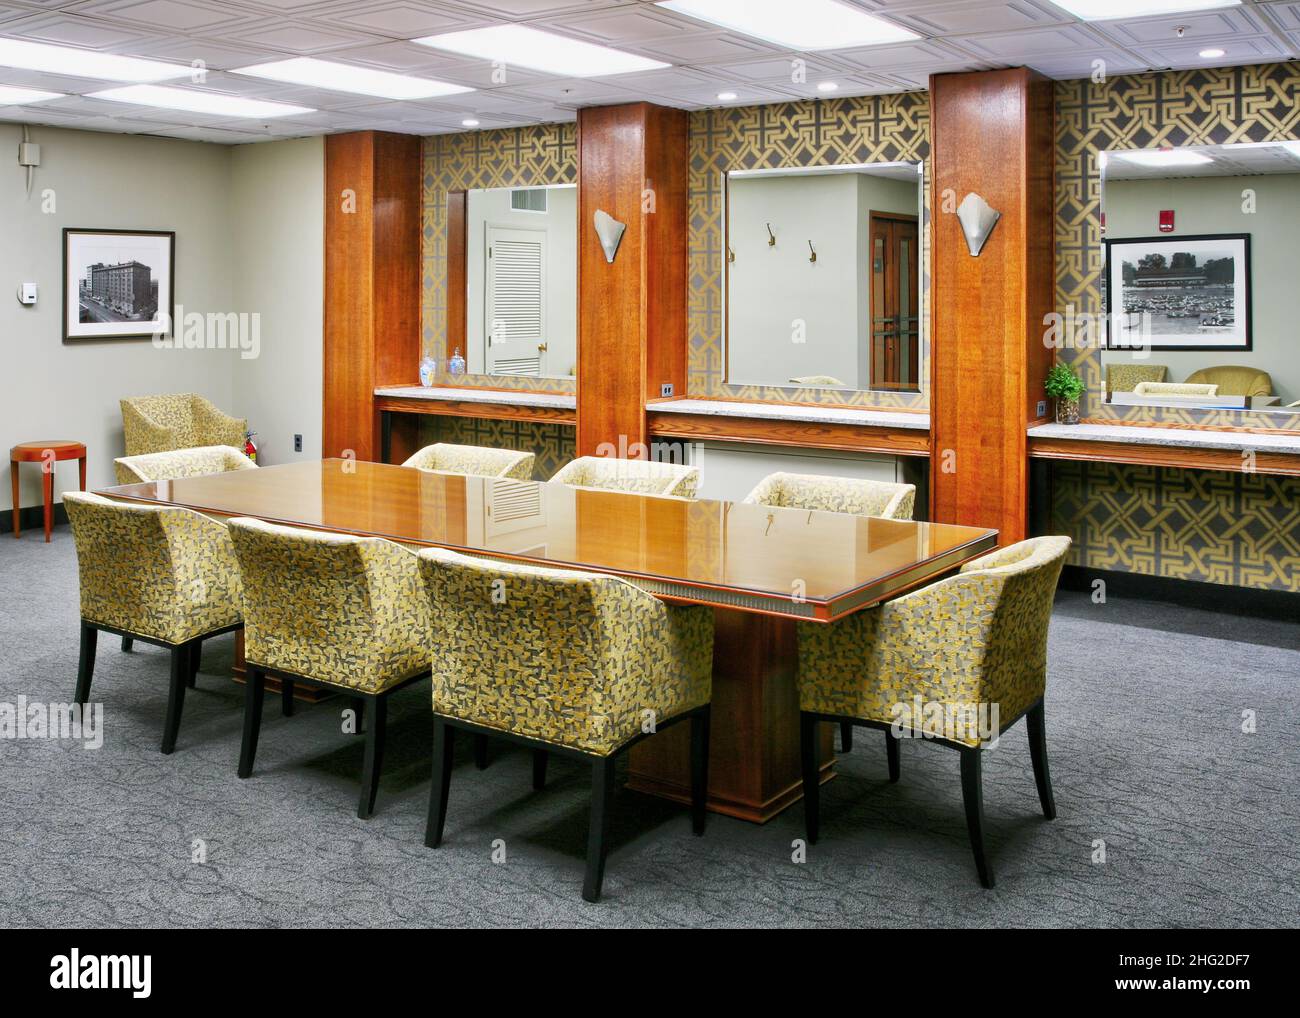 Central Trust Room used for women's gatherings. Liberty Tower, Dayton, Ohio, USA. Stock Photo